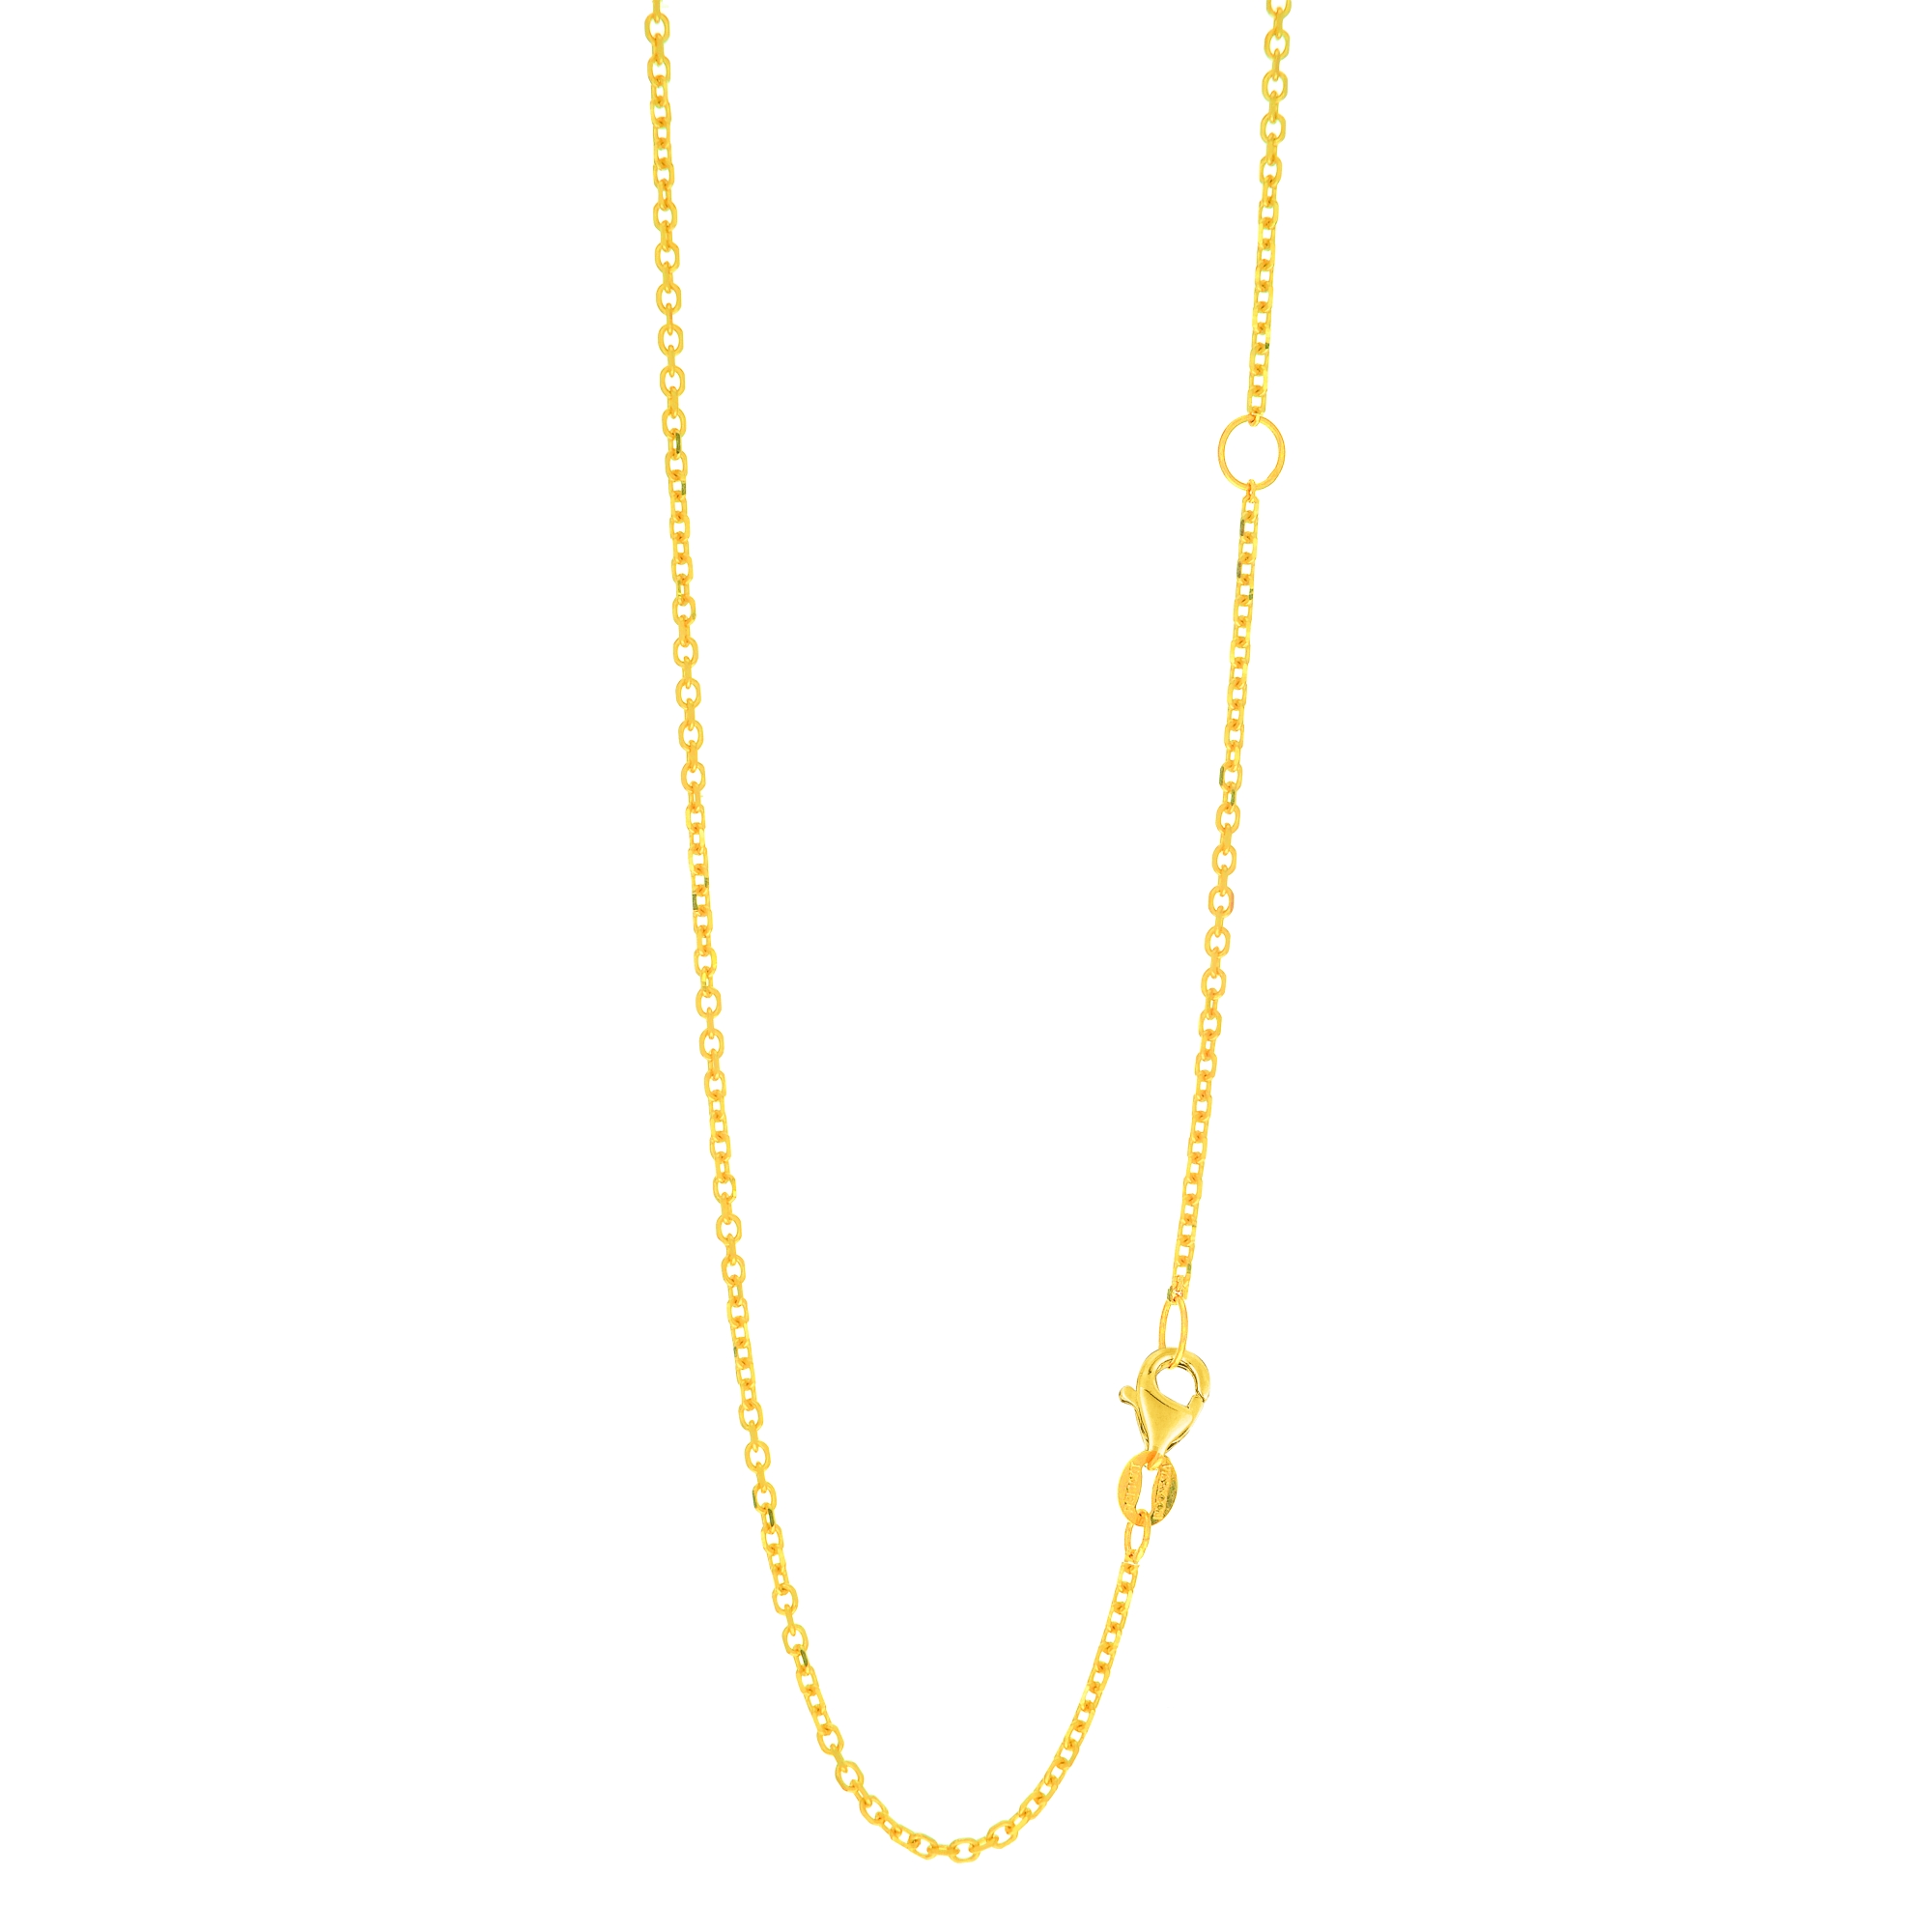 14kt 20 inches Yellow Gold 1.5mm Diamond Cut Classic Cable Chain with Lobster Clasp with Extender with Extender at 18 inches